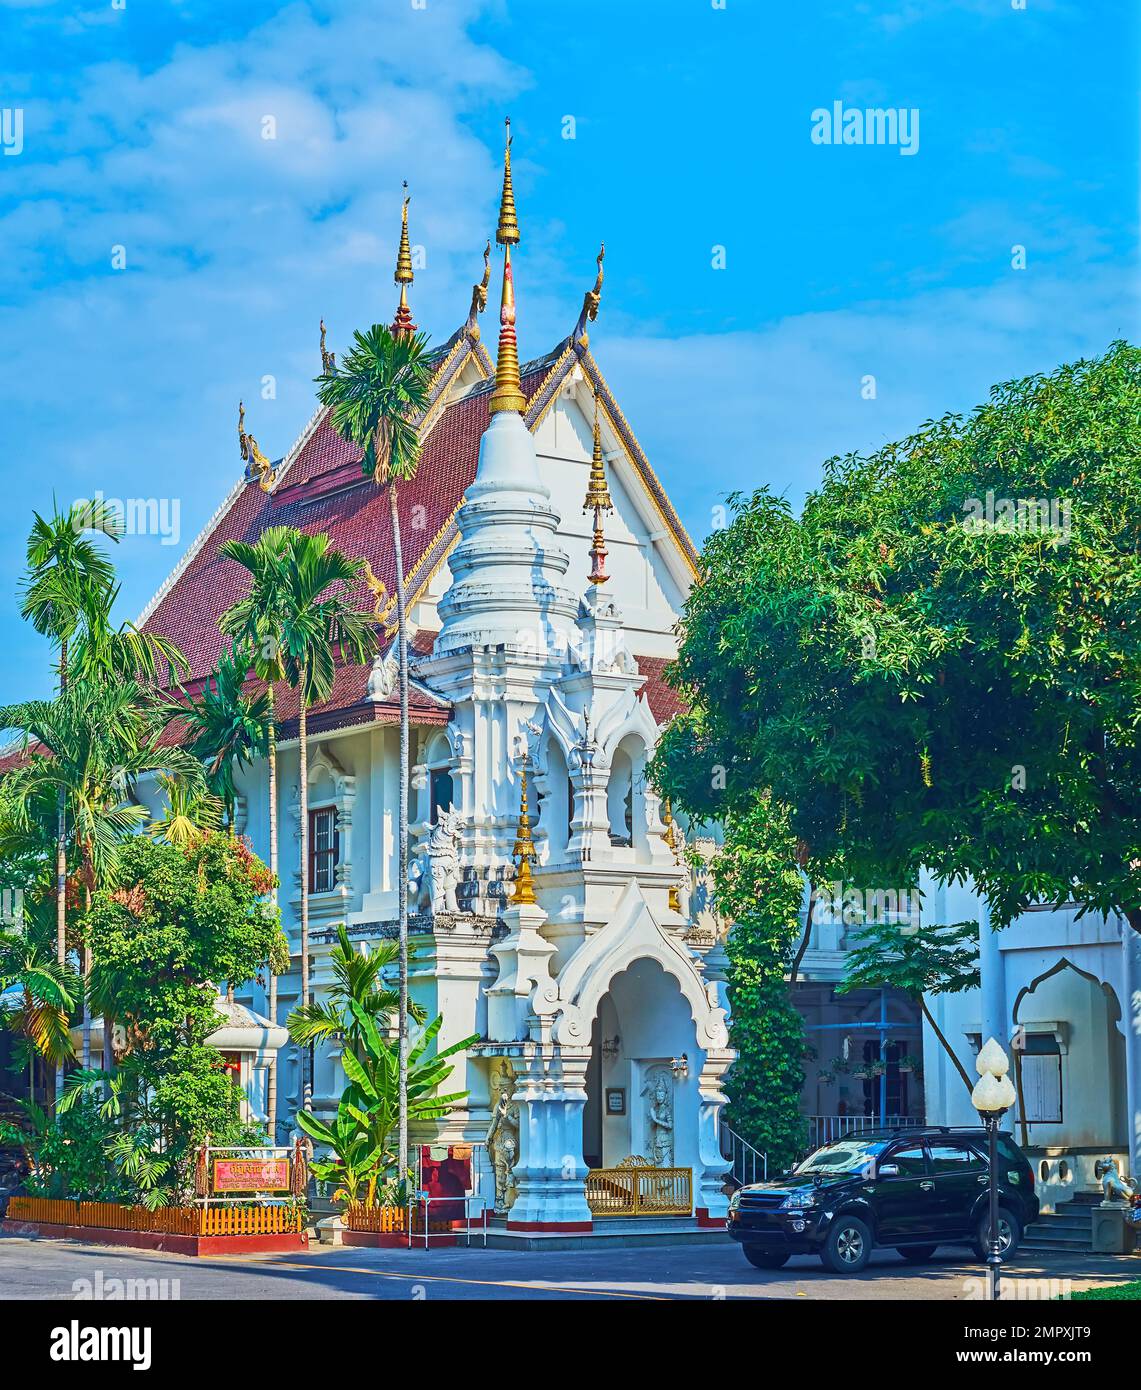 The elegant white monastic building of Wat Saen Muang Ma temple with gilt hti umbrellas and green palms around it, Chiang Mai, Thailand Stock Photo